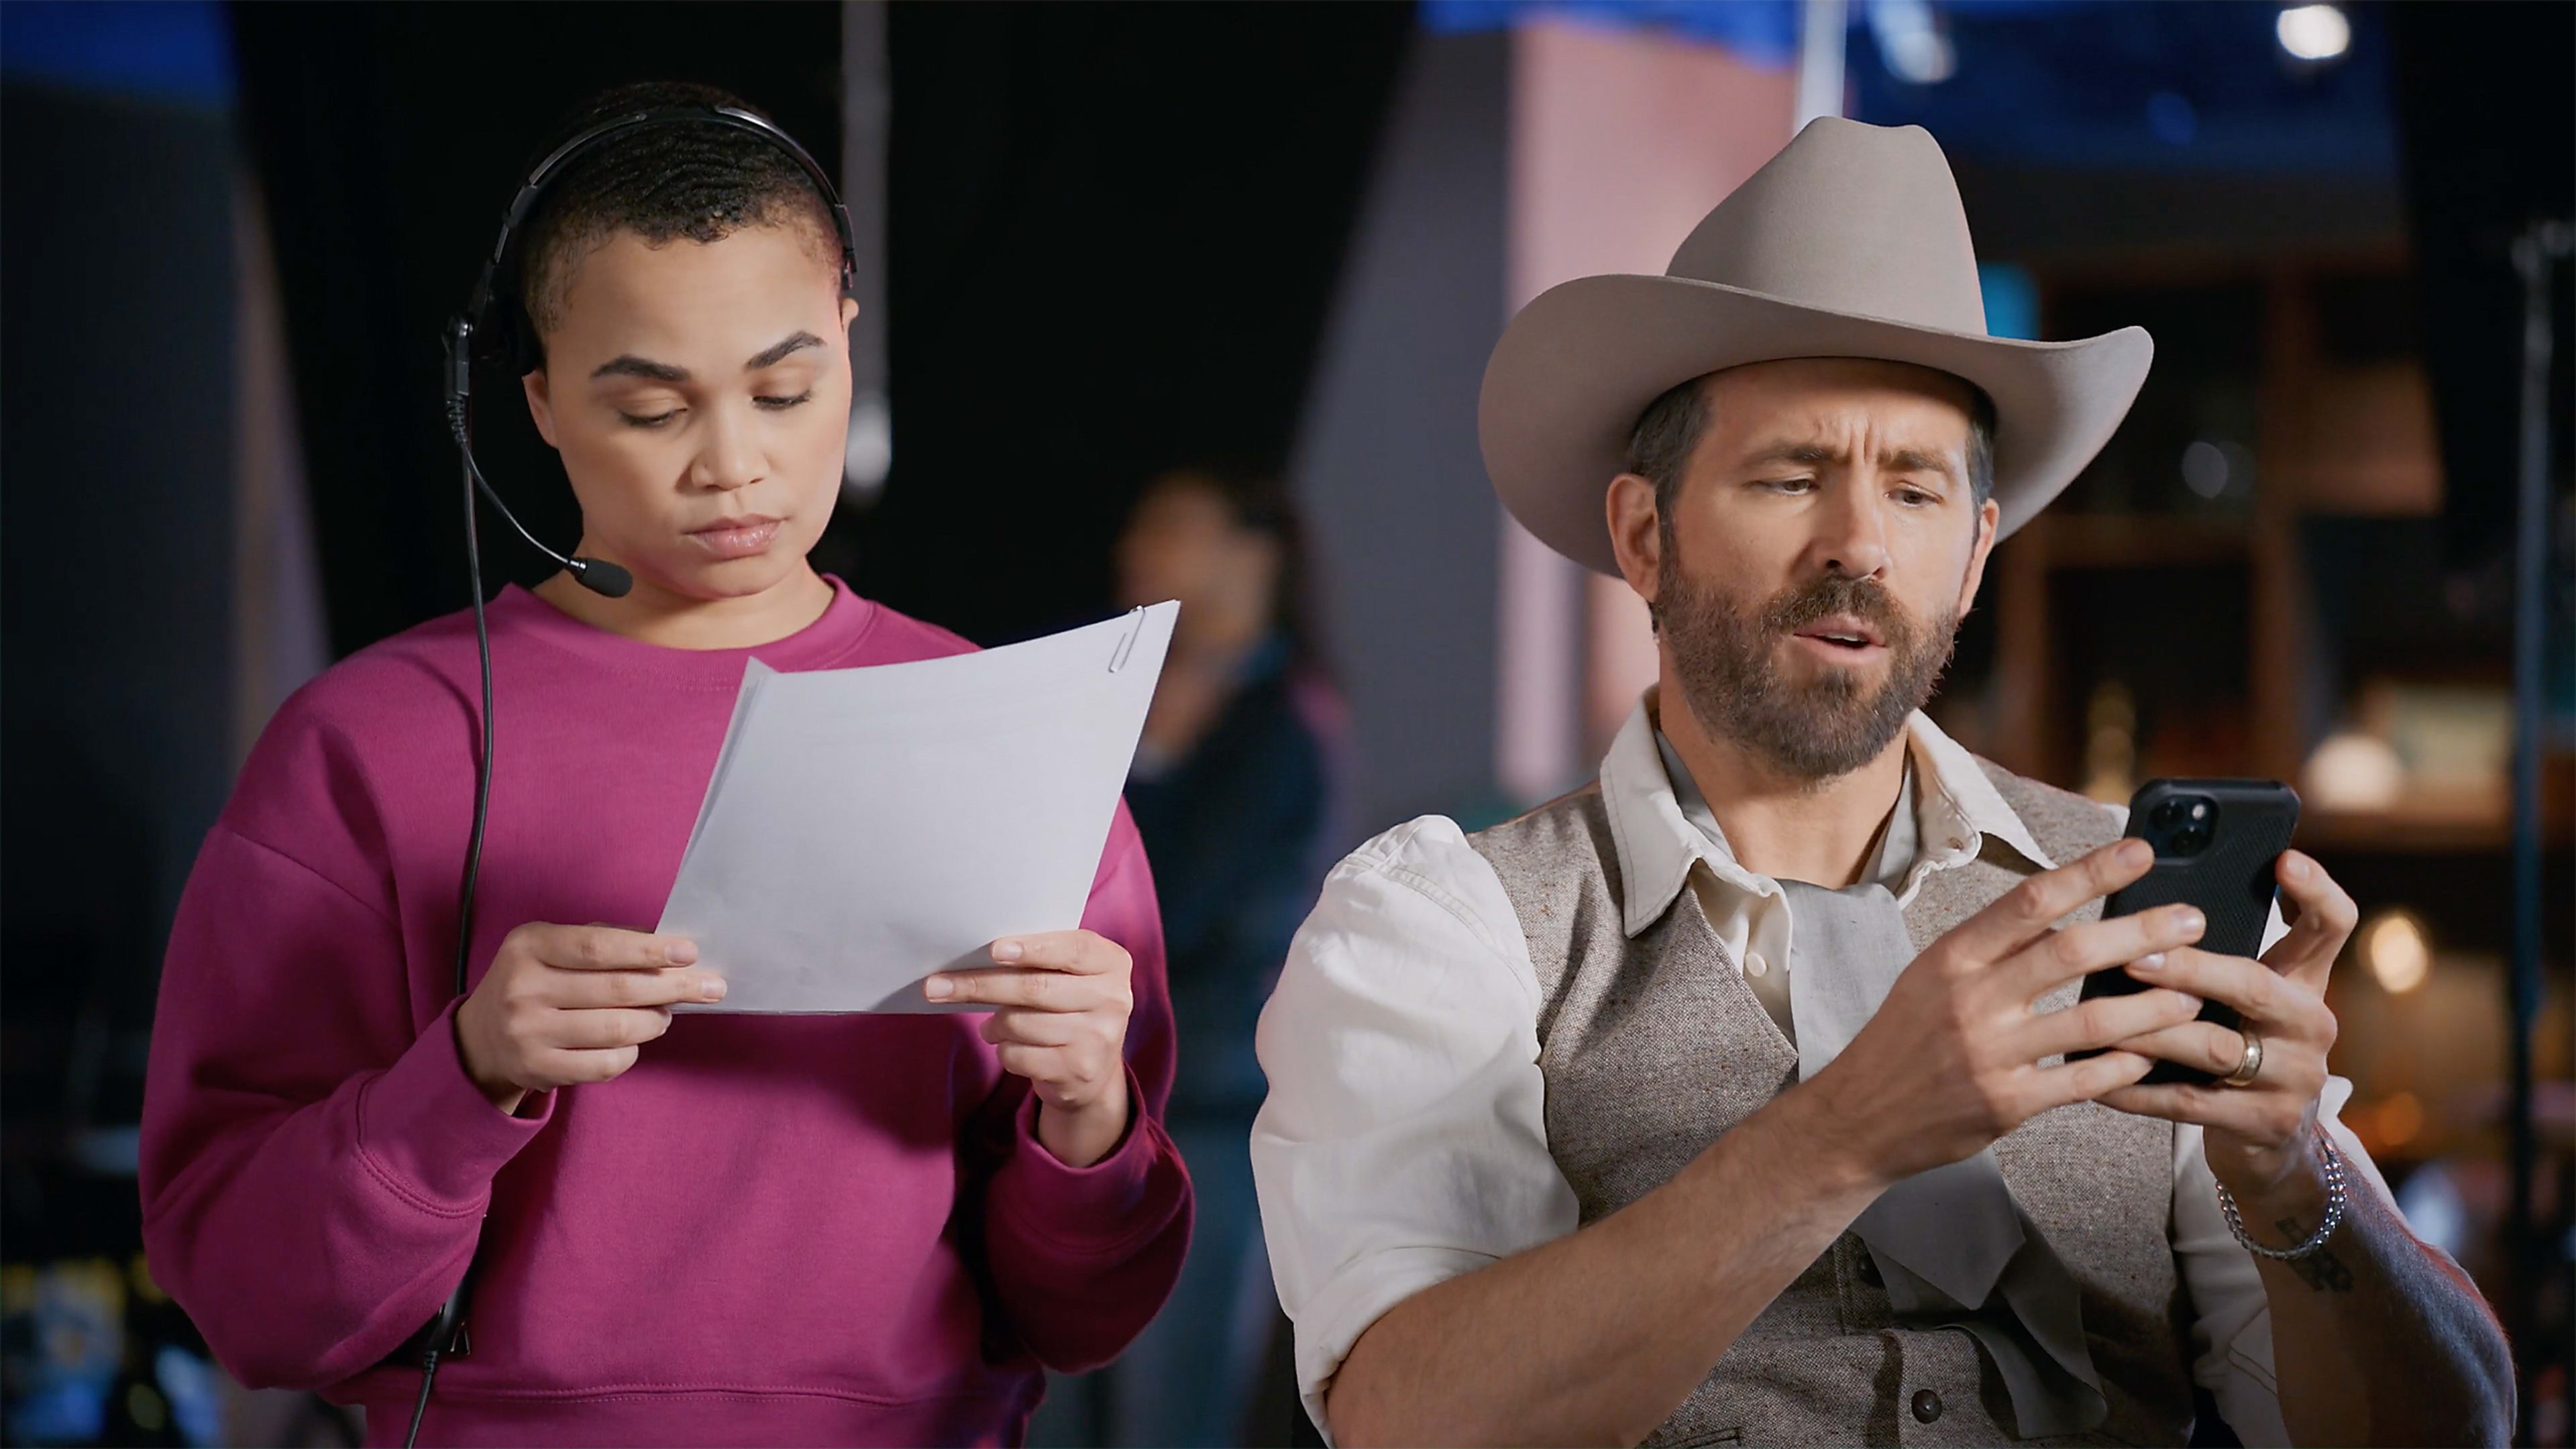 Ryan Reynolds’s new 1Password ad goes for funny over fear-mongering with online security